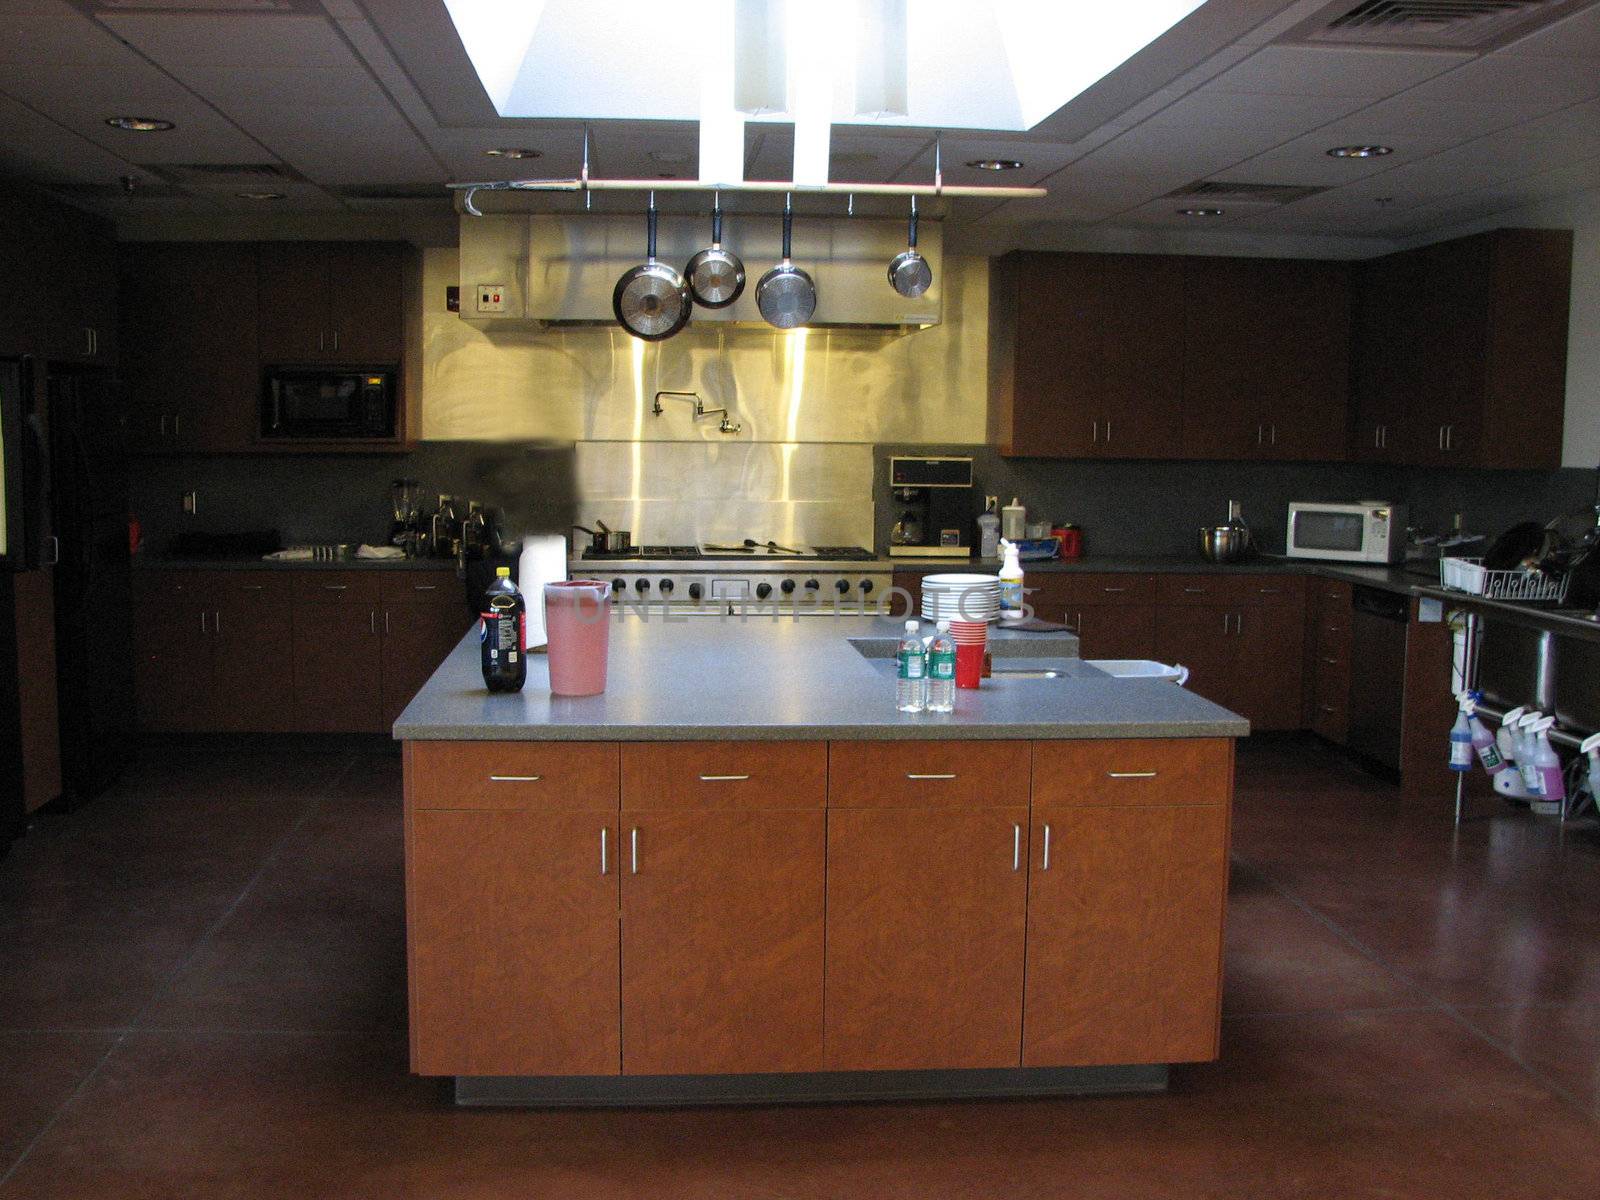 New kitchen is newly opened fire station